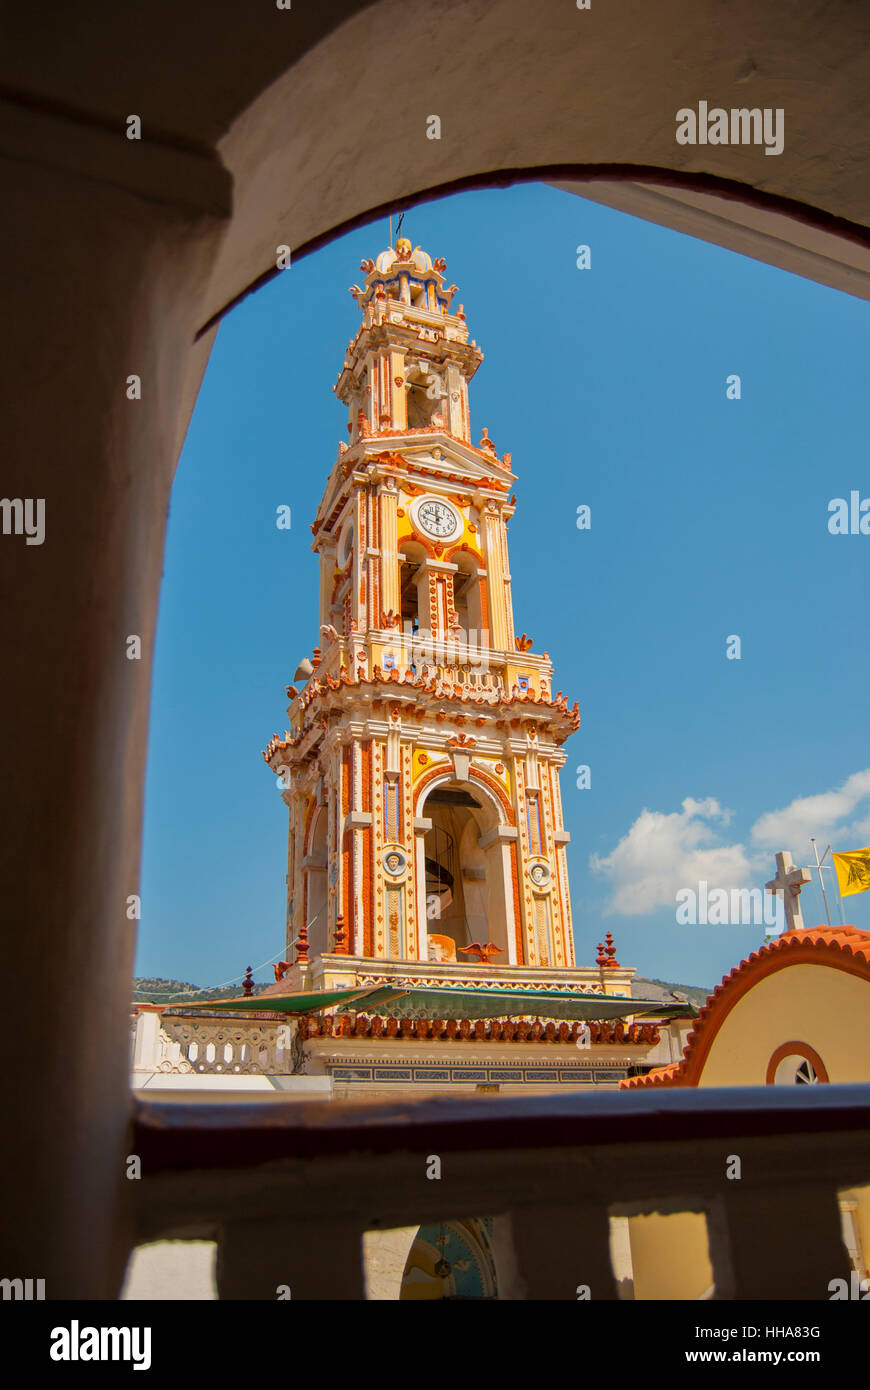 CHurch tower of monastery of the Archangel Michael Panormitis on the island of symi greece Stock Photo